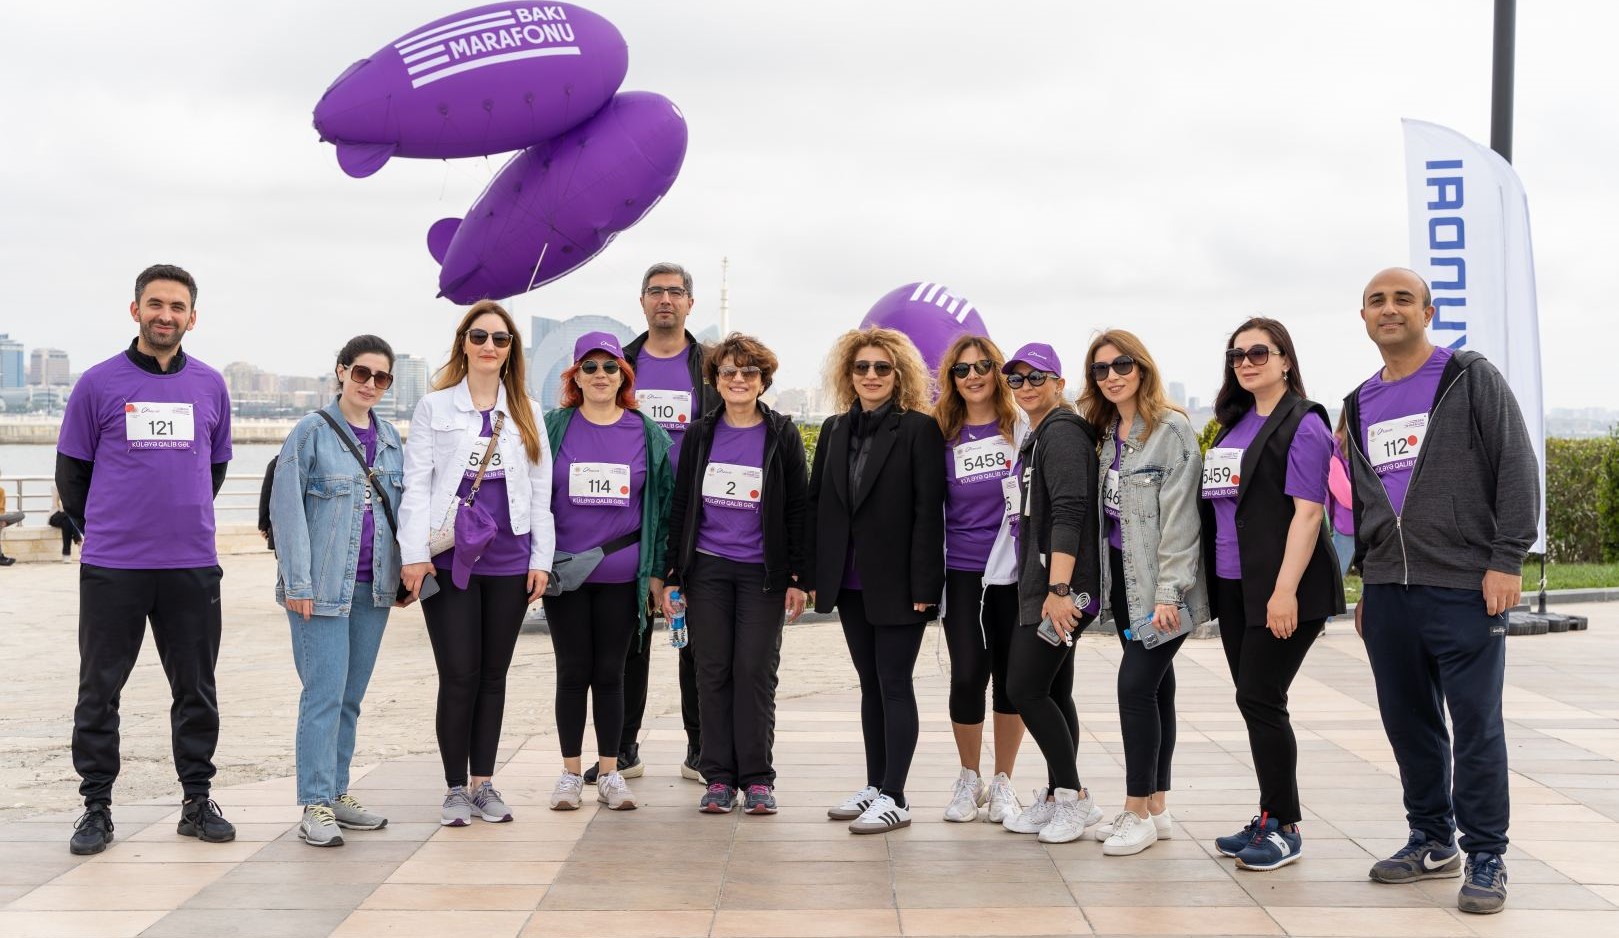 (Ad) "Baku Marathon-2023" took place in an exclusive partnership with Azercell